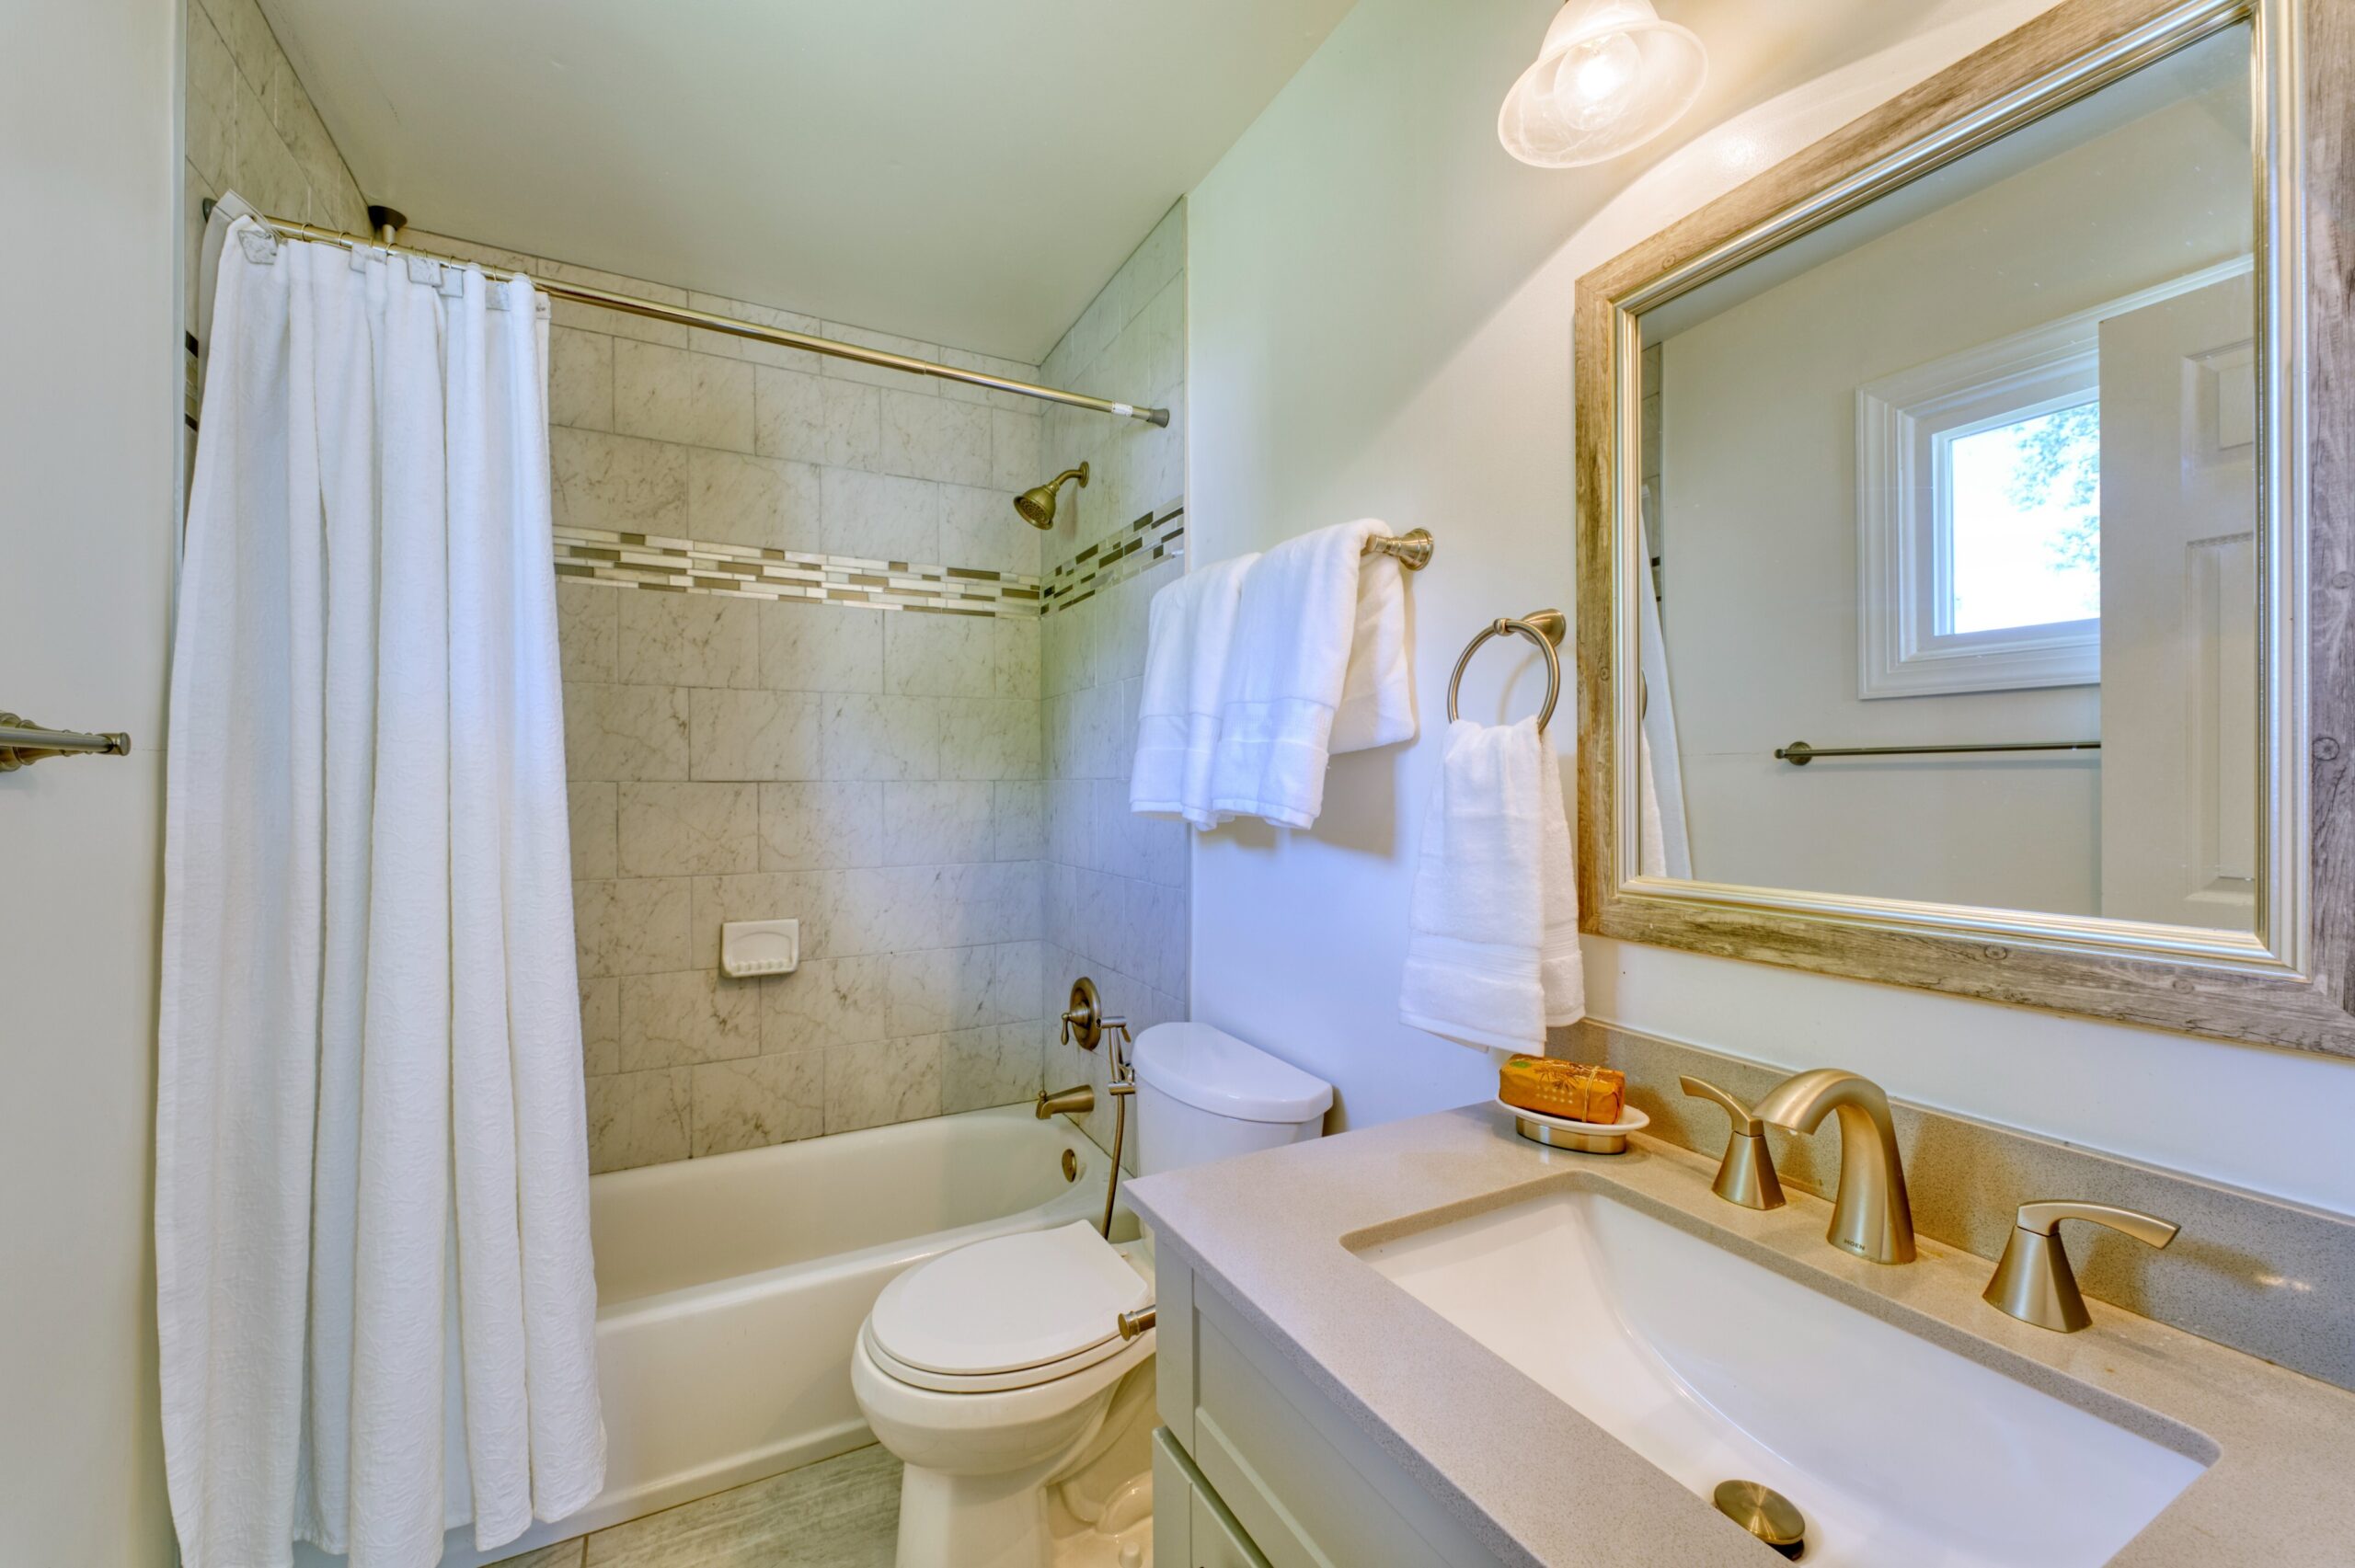 professional interior photo of 102 S Harrison Road, Sterling, VA - showing a full bathroom with stone shower